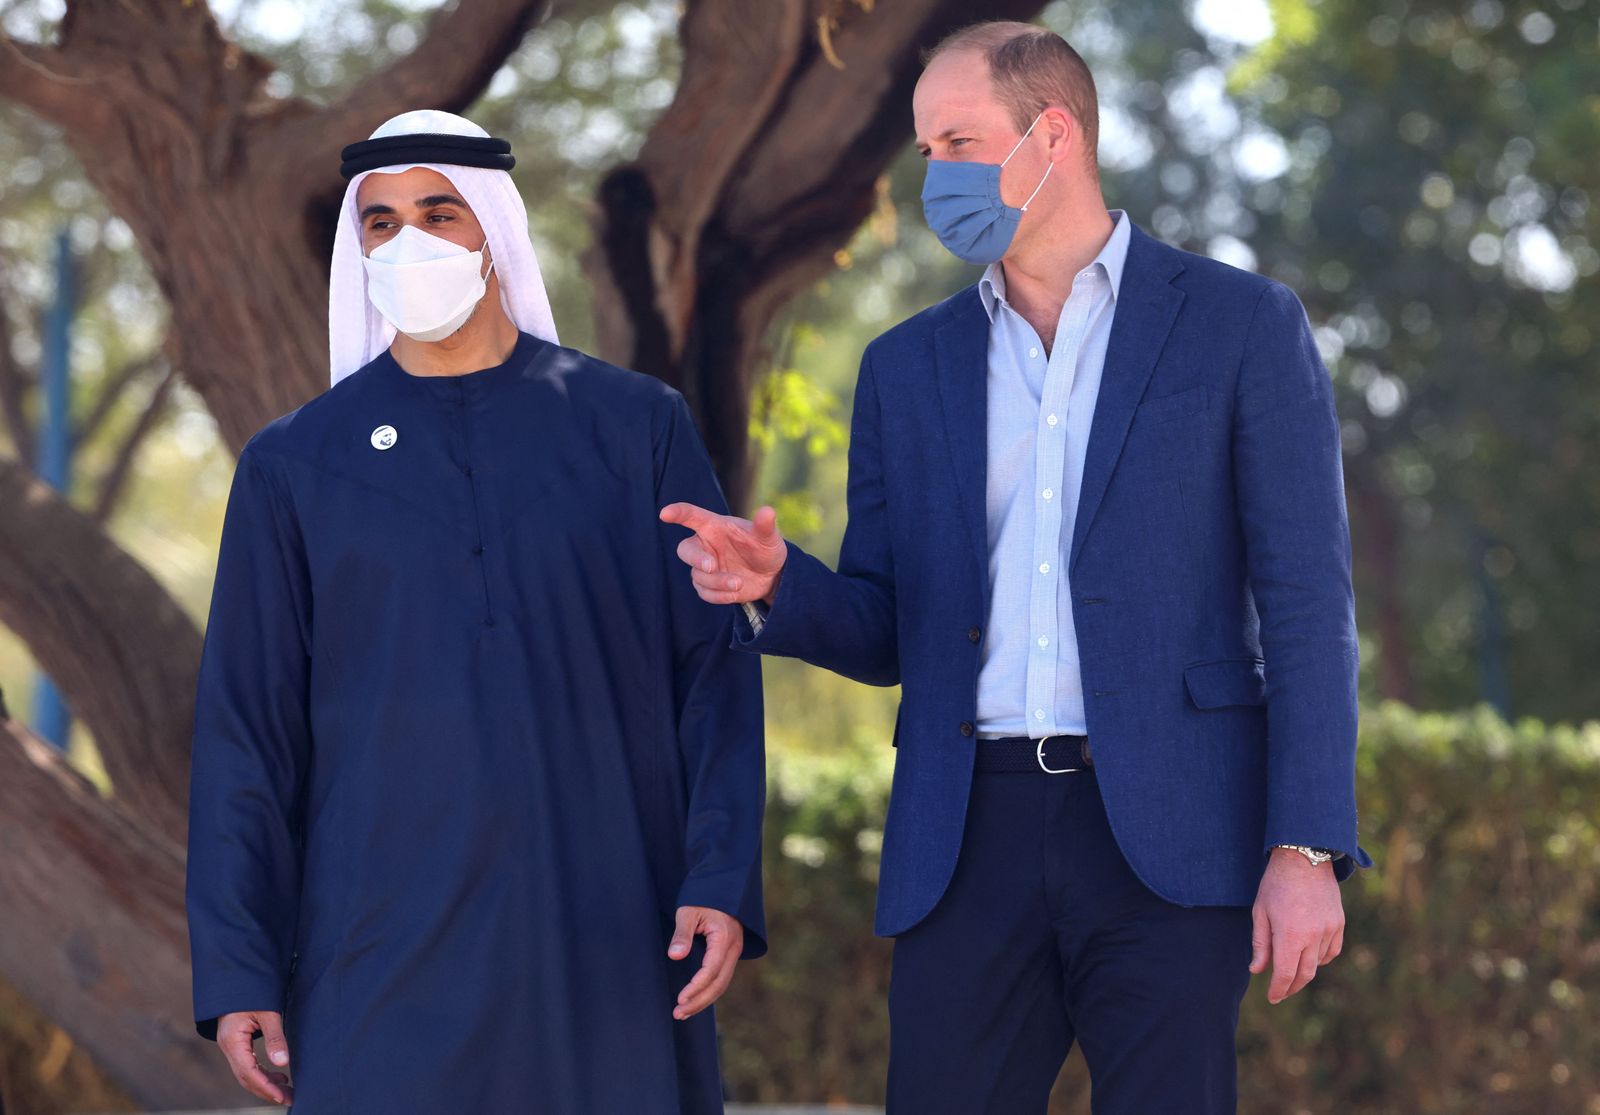 Britain's Prince William, Duke of Cambridge, gestures as she tours alongside Sheikh Khaled bin Mohamed bin Zayed al-Nahyan, chairman of Abu Dhabi's Executive Office, the Jubail Magrove Park in Abu Dhabi during an official visit to the United Arab Emirates on February 10, 2022. - Prince William's climate-focused visit also aims to bolster ties between the two countries after the UAE, a former British protectorate, marked 50 years since its founding in 1971. (Photo by Giuseppe CACACE / AFP) - AFP